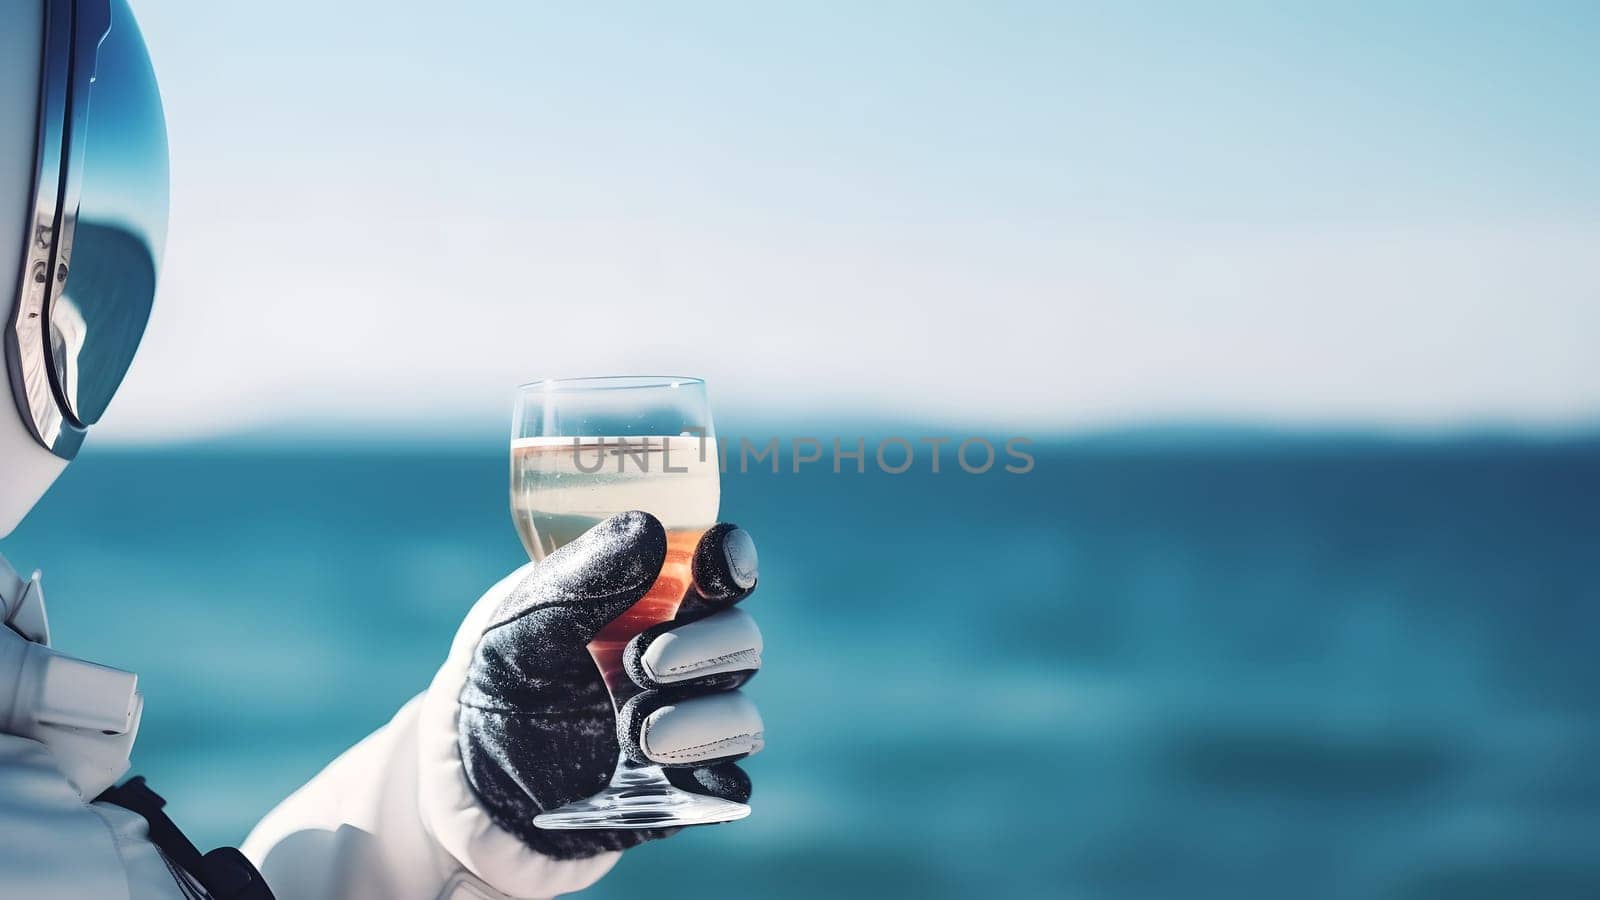 astronaut in space suit holding glass of cocktail on blurry sea horizon background at sunny day, neural network generated image by z1b